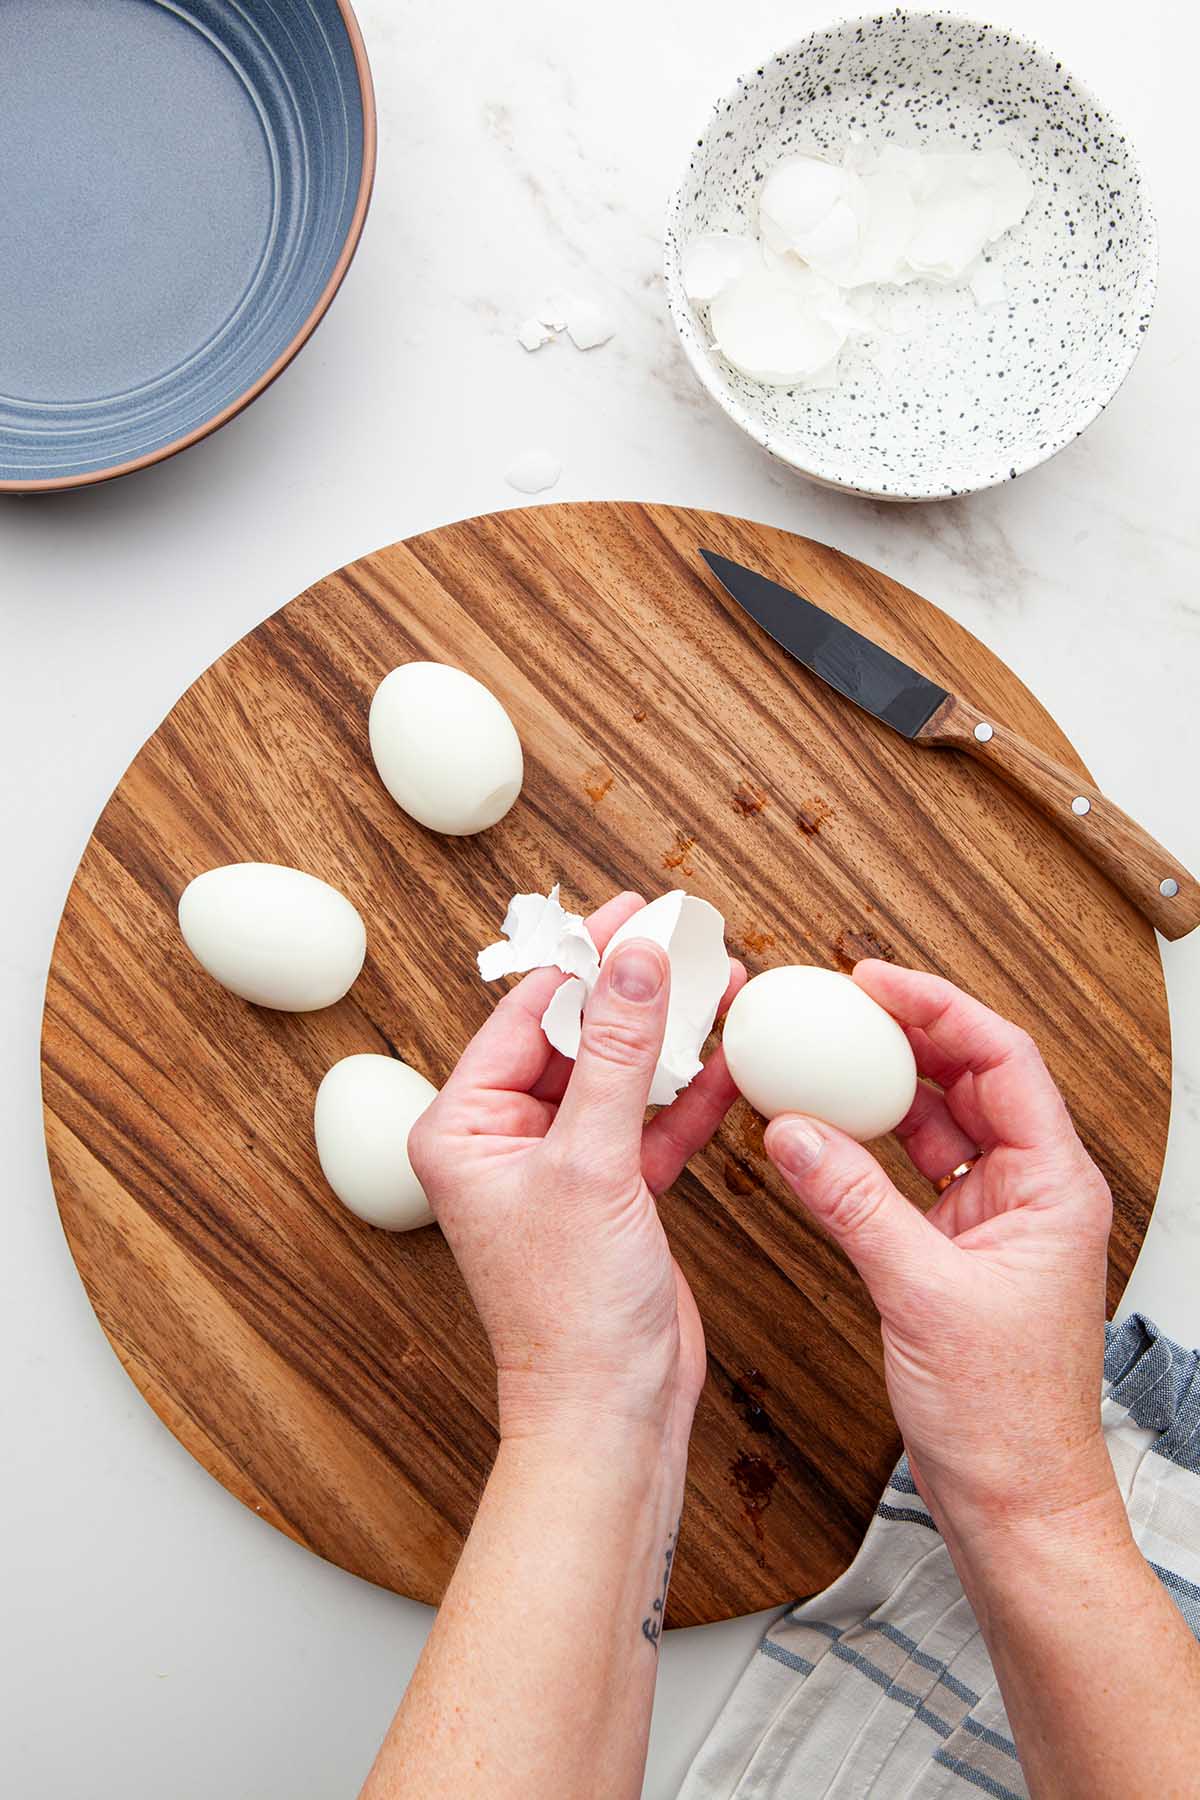 Hands removing the shell from a hard boiled egg.